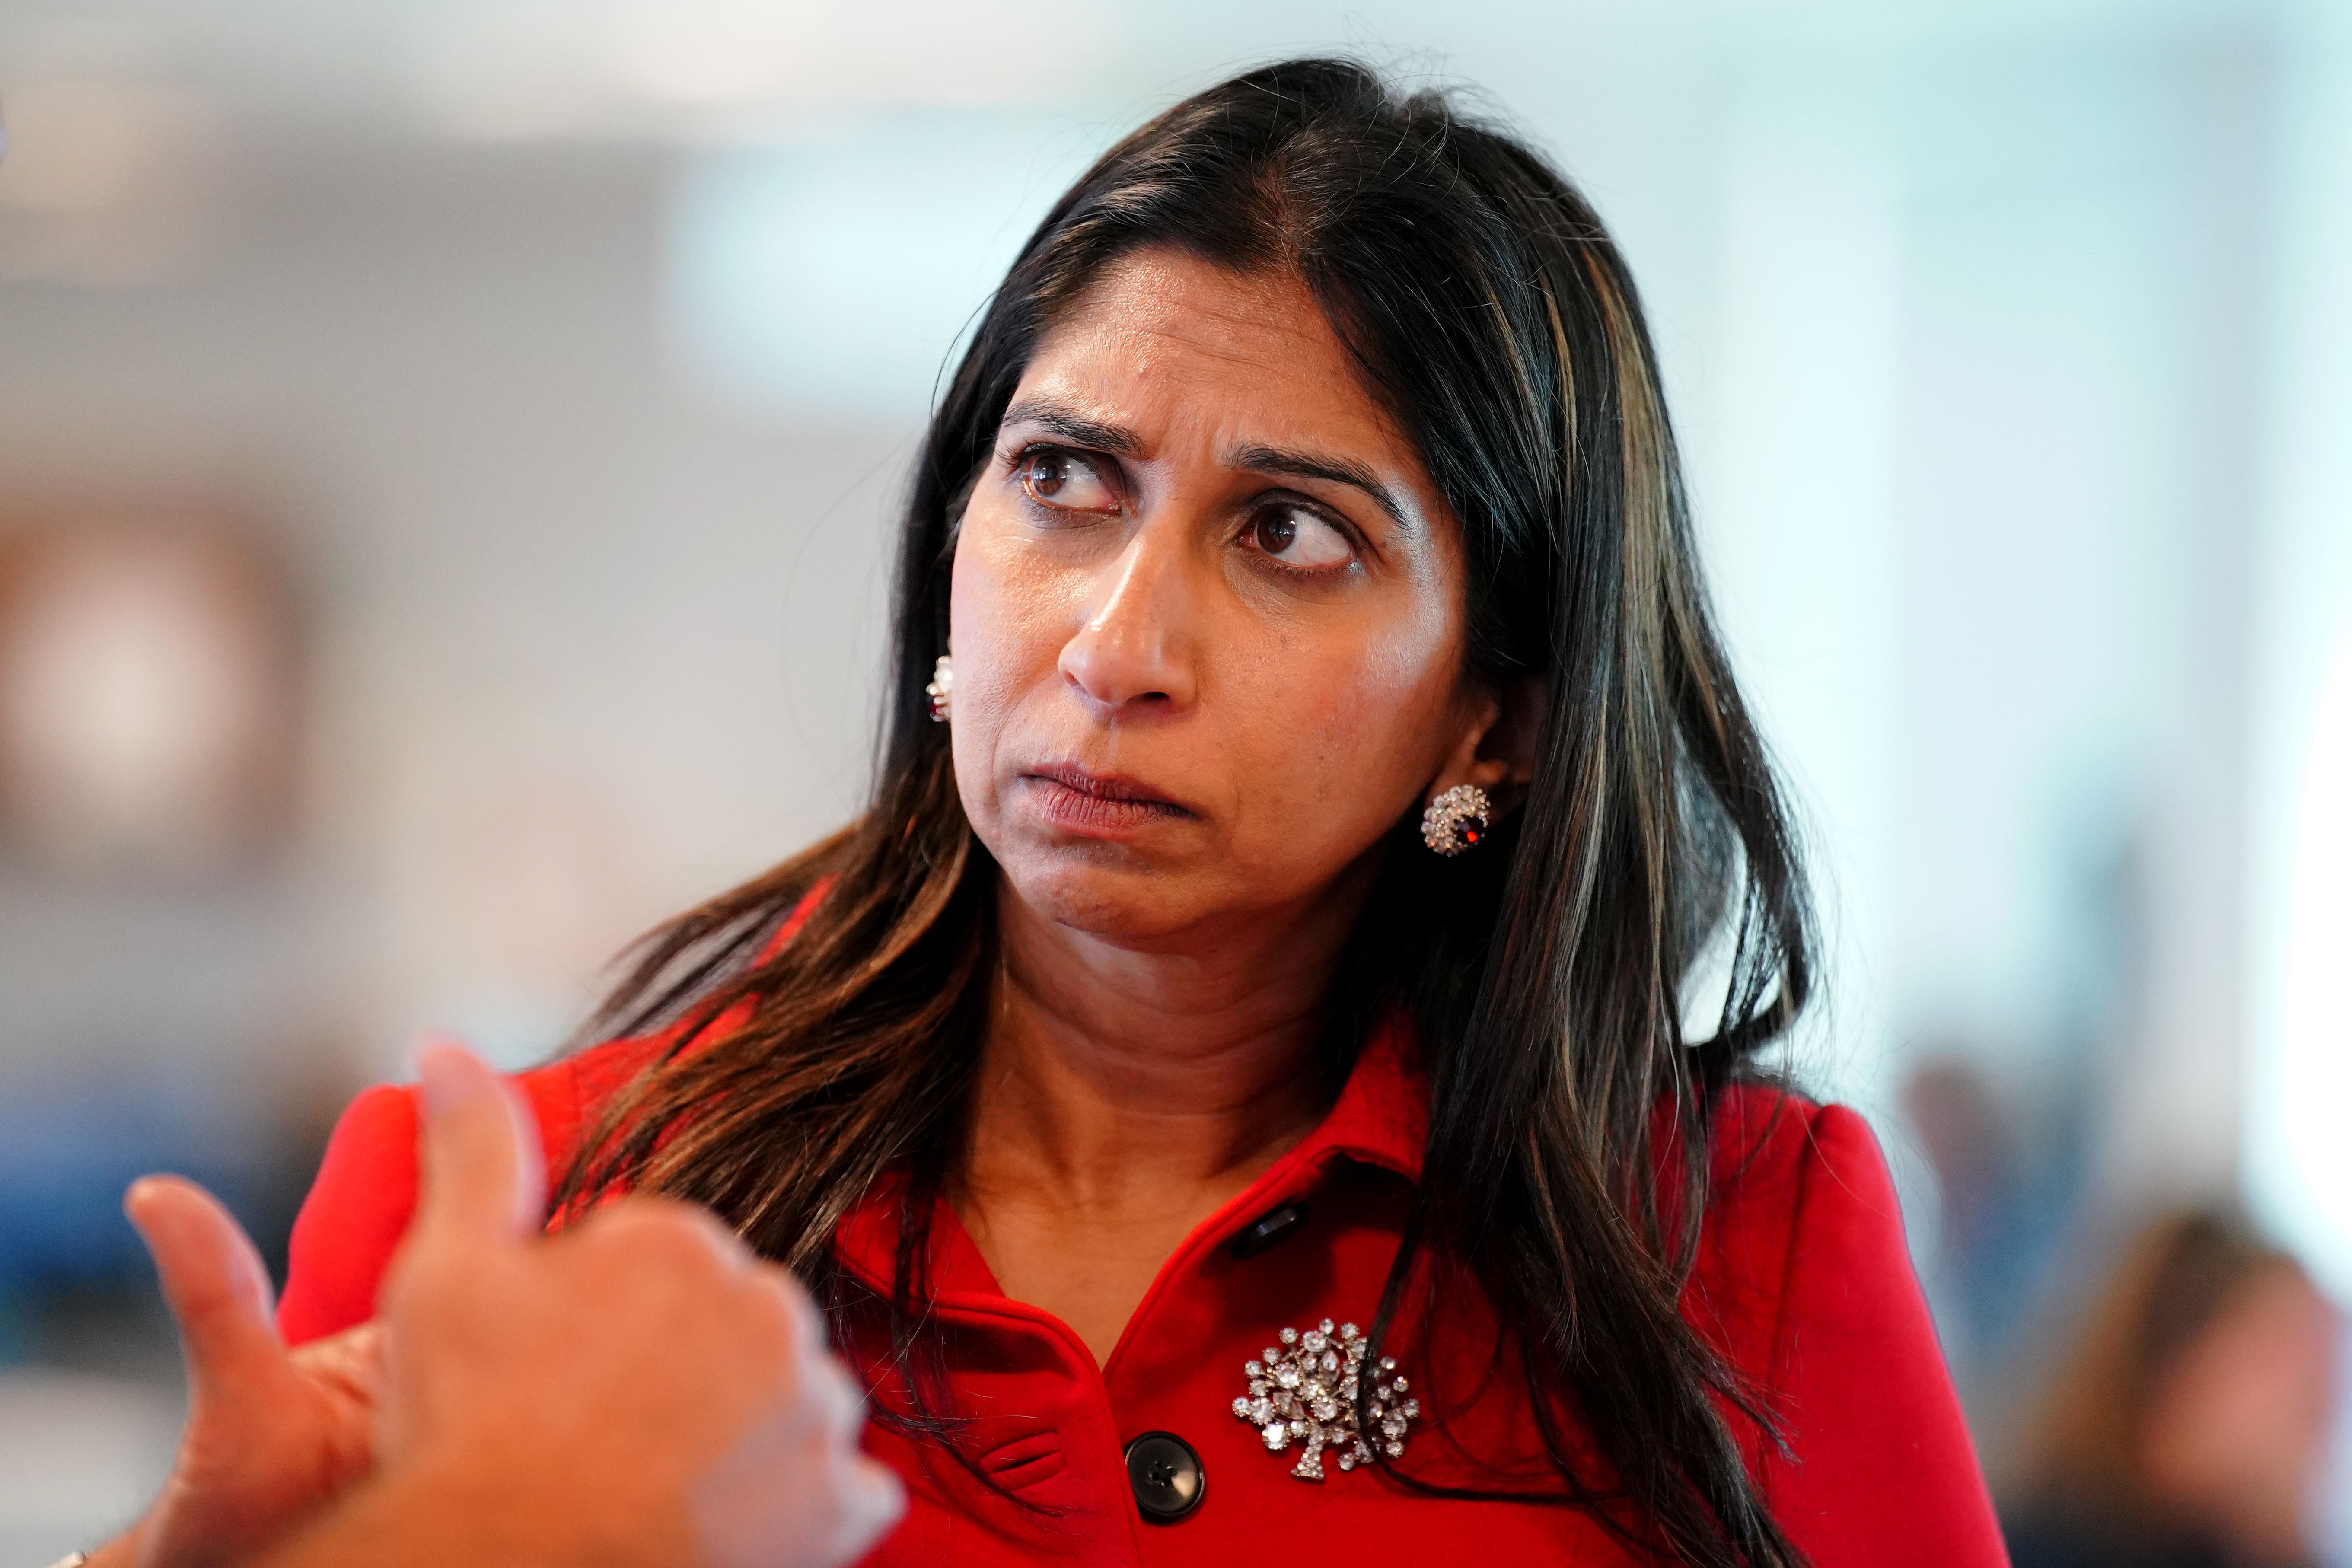 Suella Braverman is among highest spenders on taxpayer-funded fuel bills